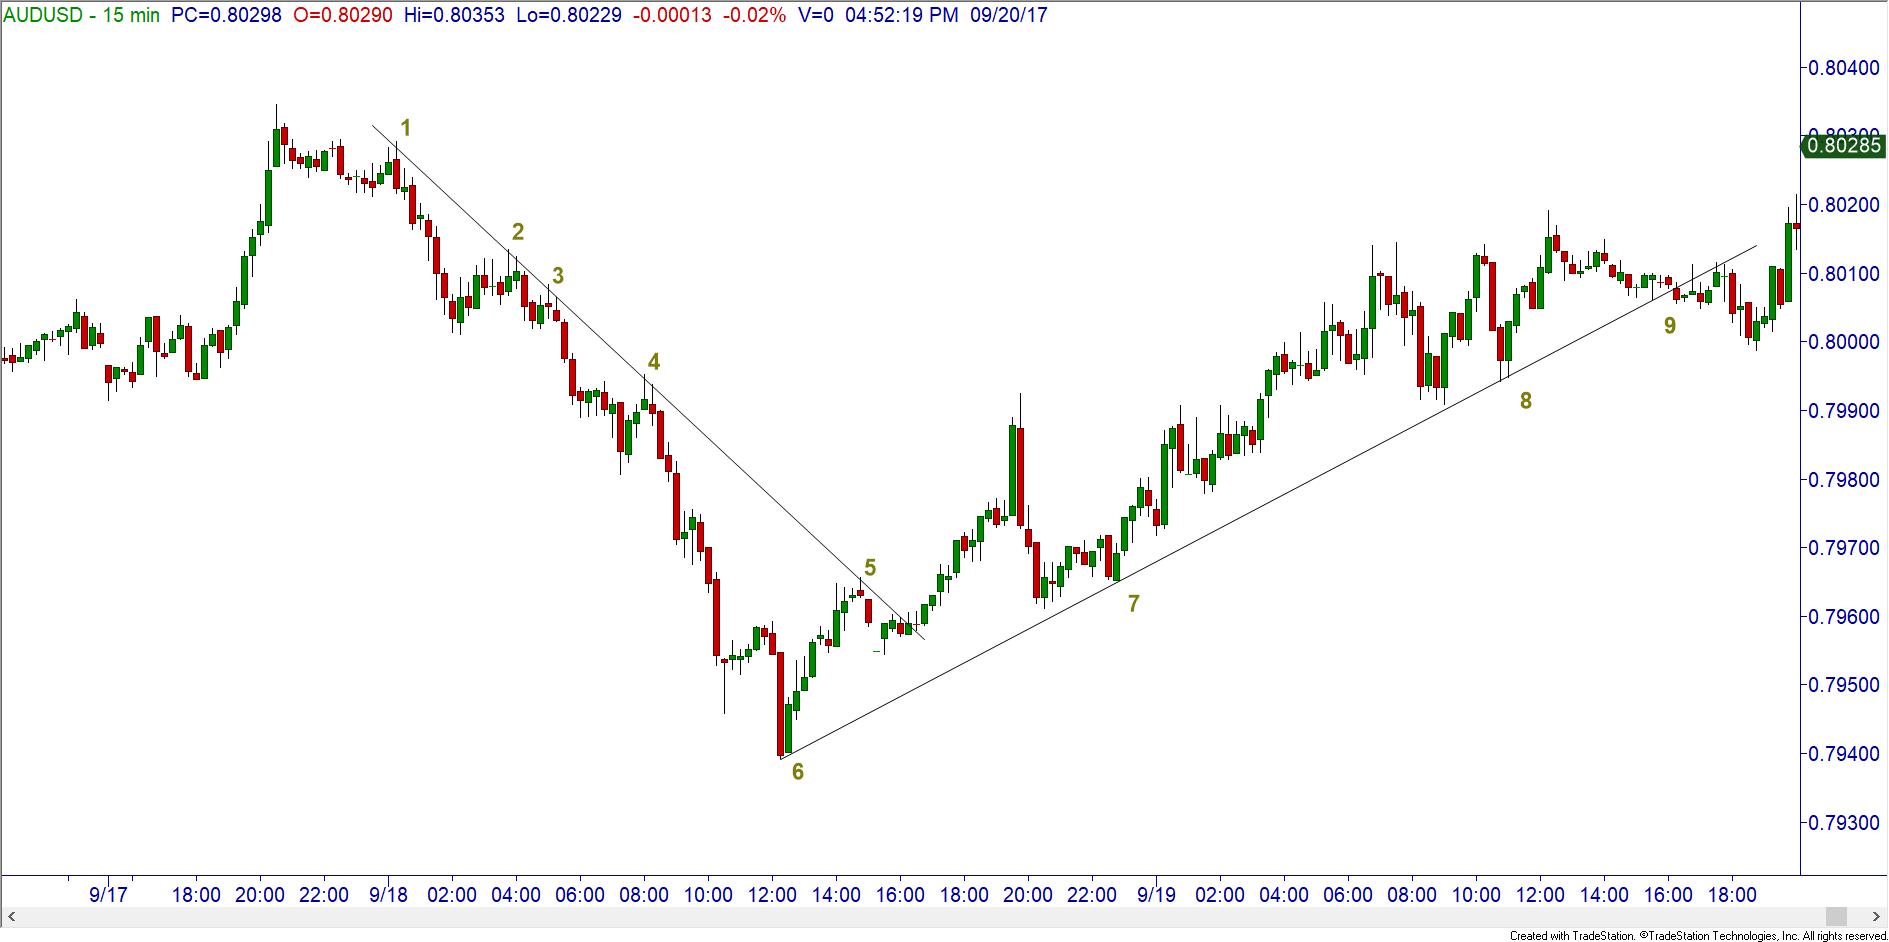 3 Minute Chart Trading